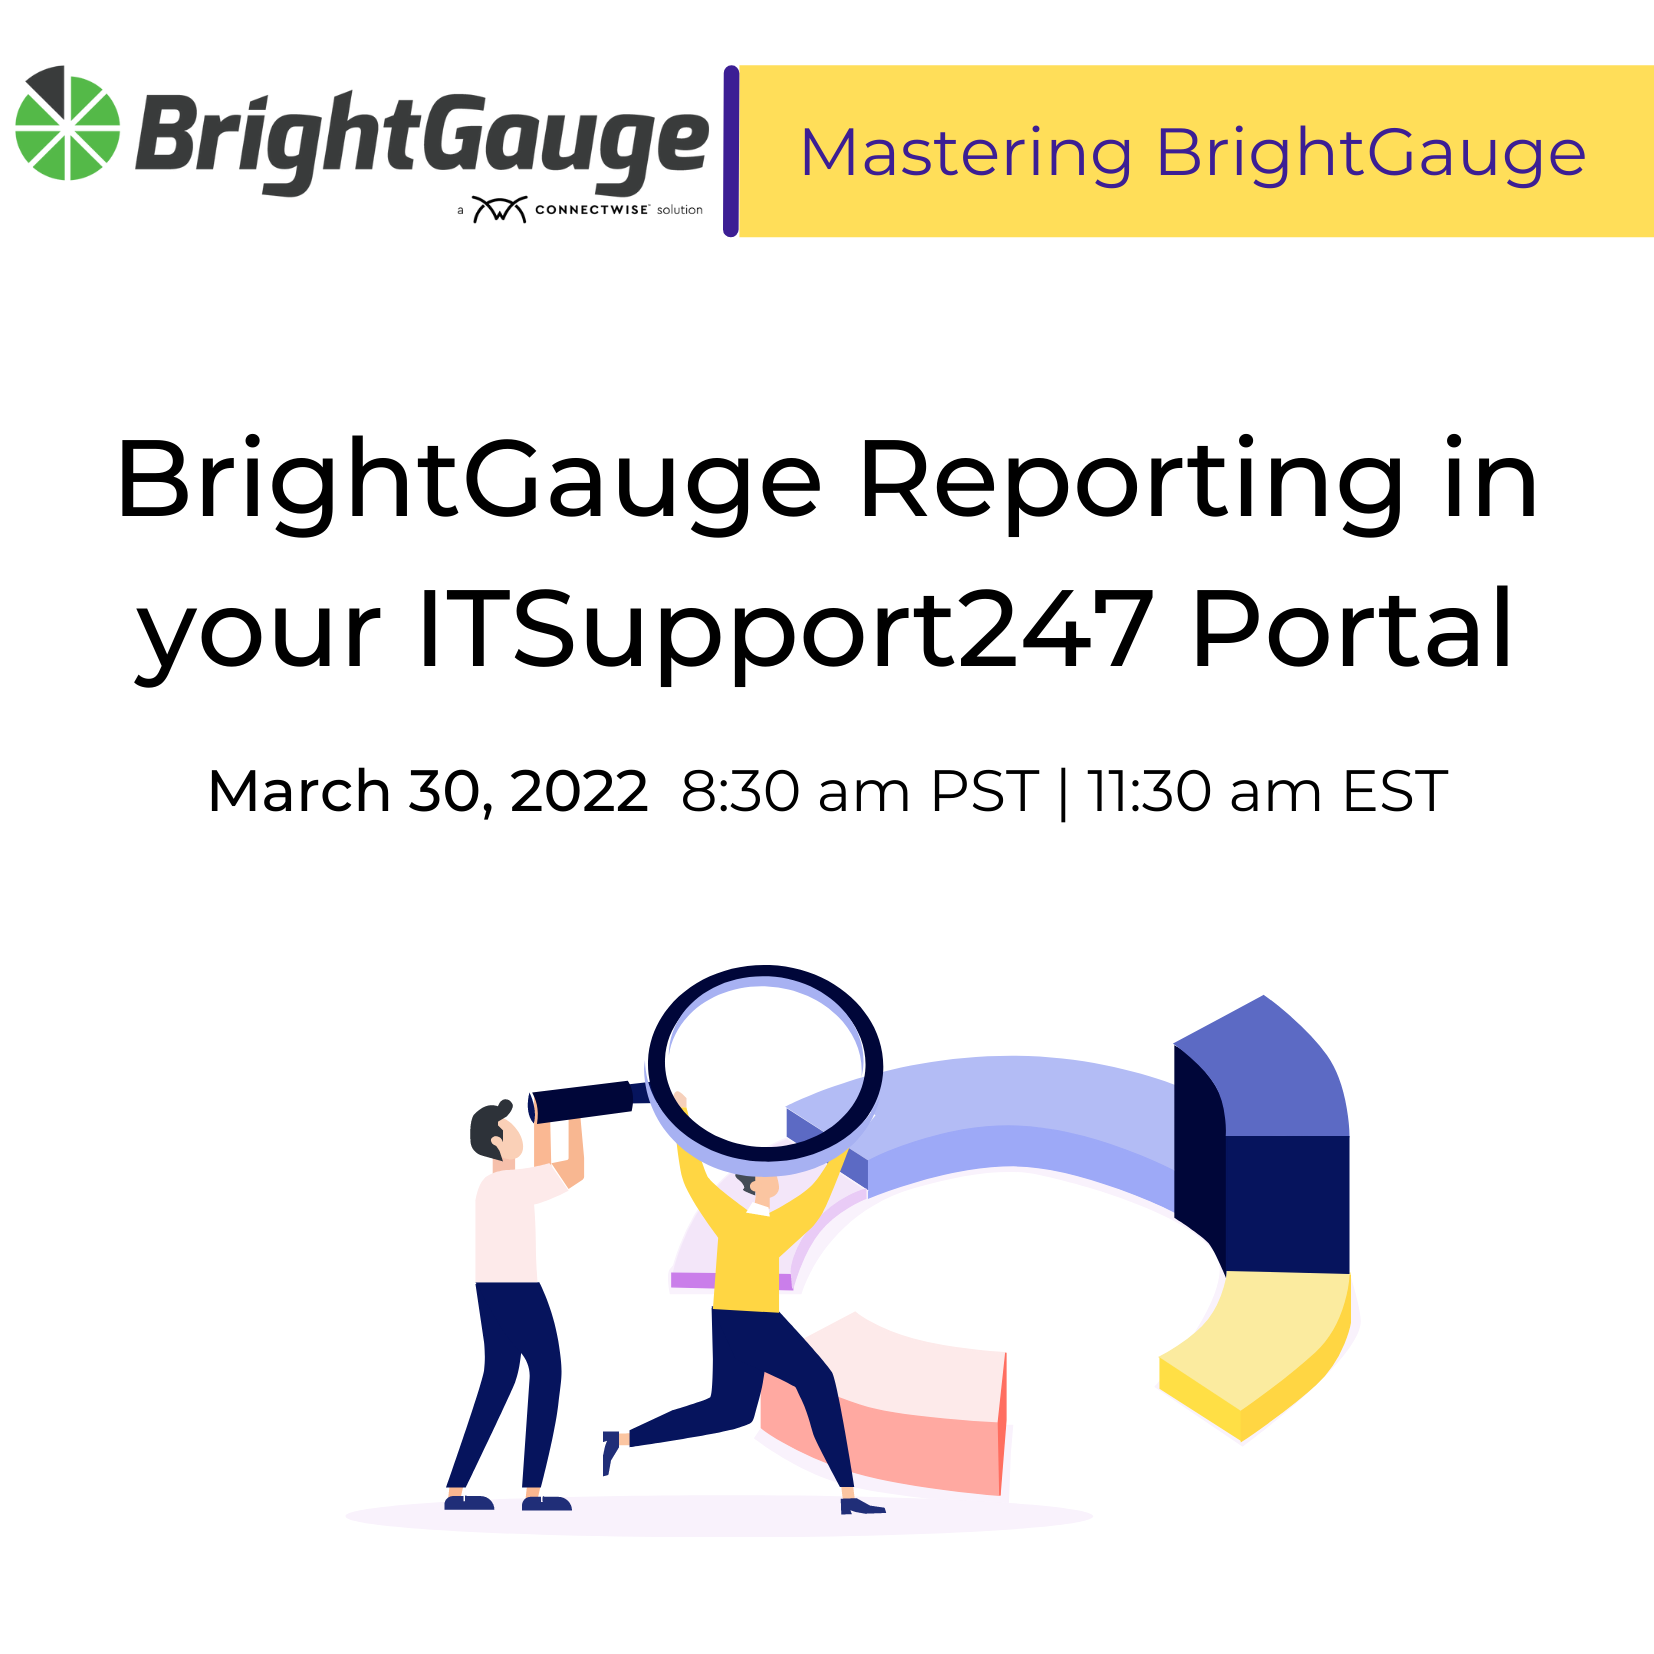 Mastering BrightGauge Webinar Reporting In Your ITSupport247 Portal